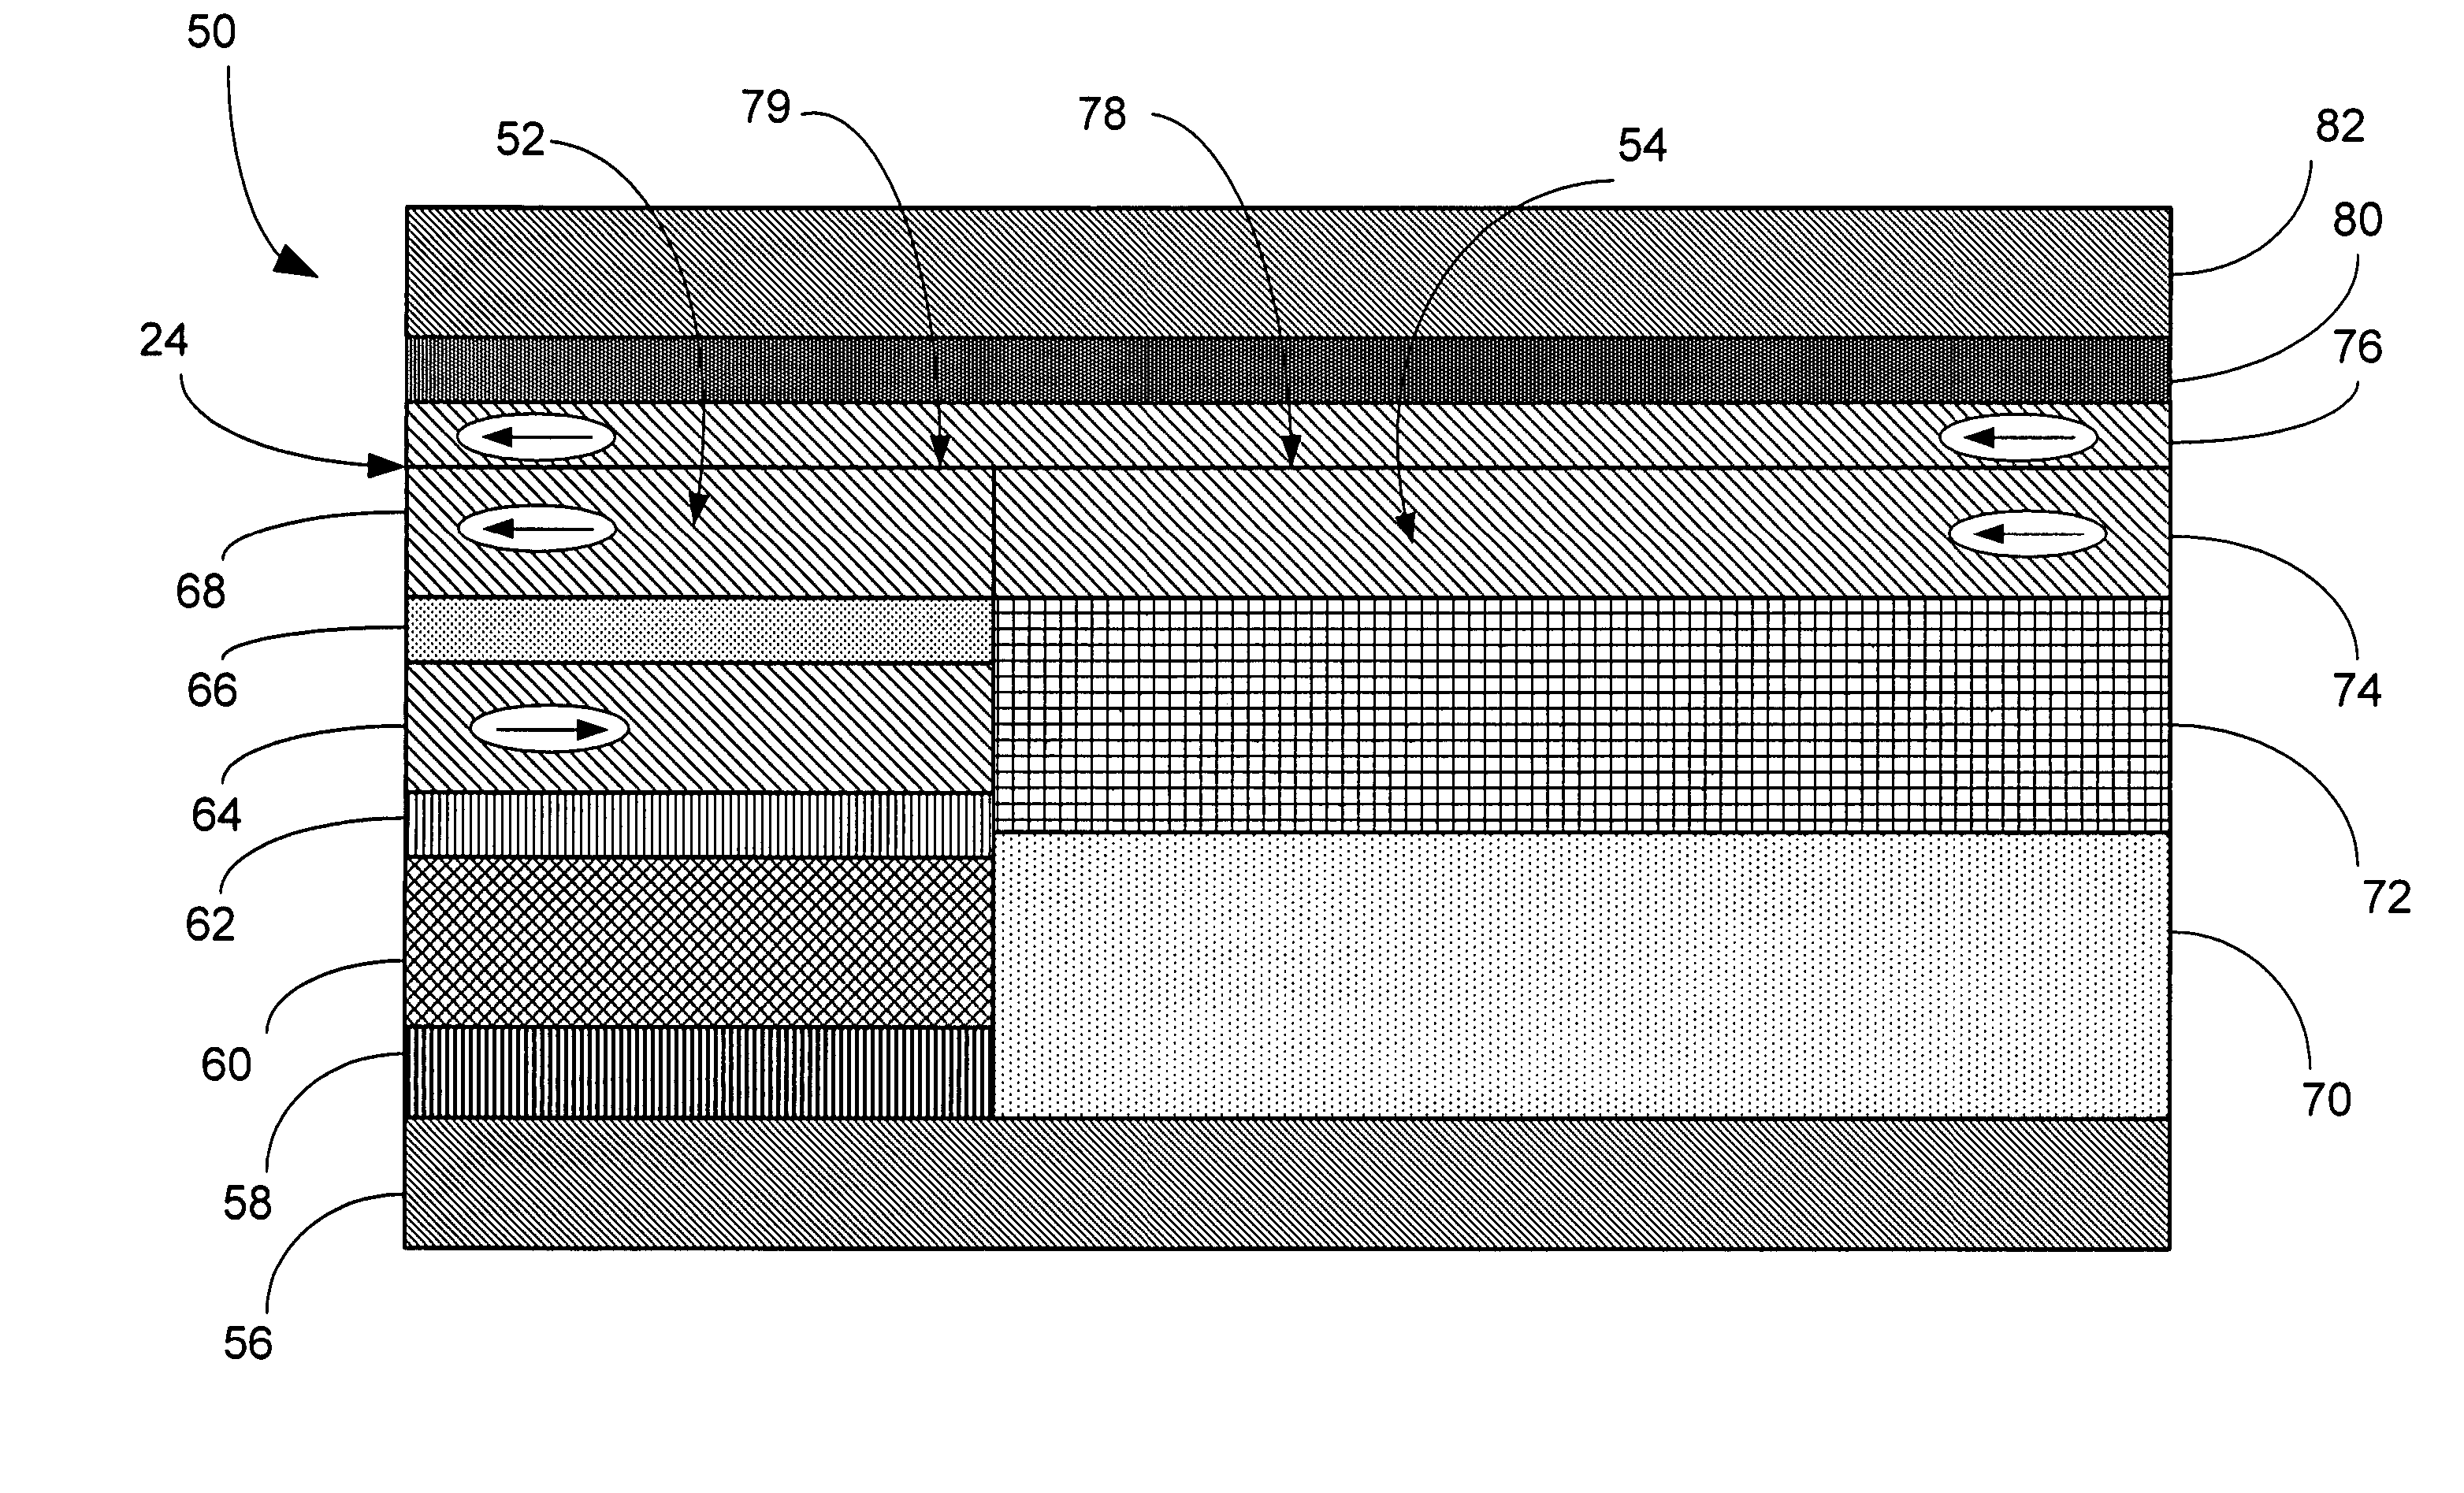 Top CPP GMR/TV with back end of stripe pinned by insulating AFM